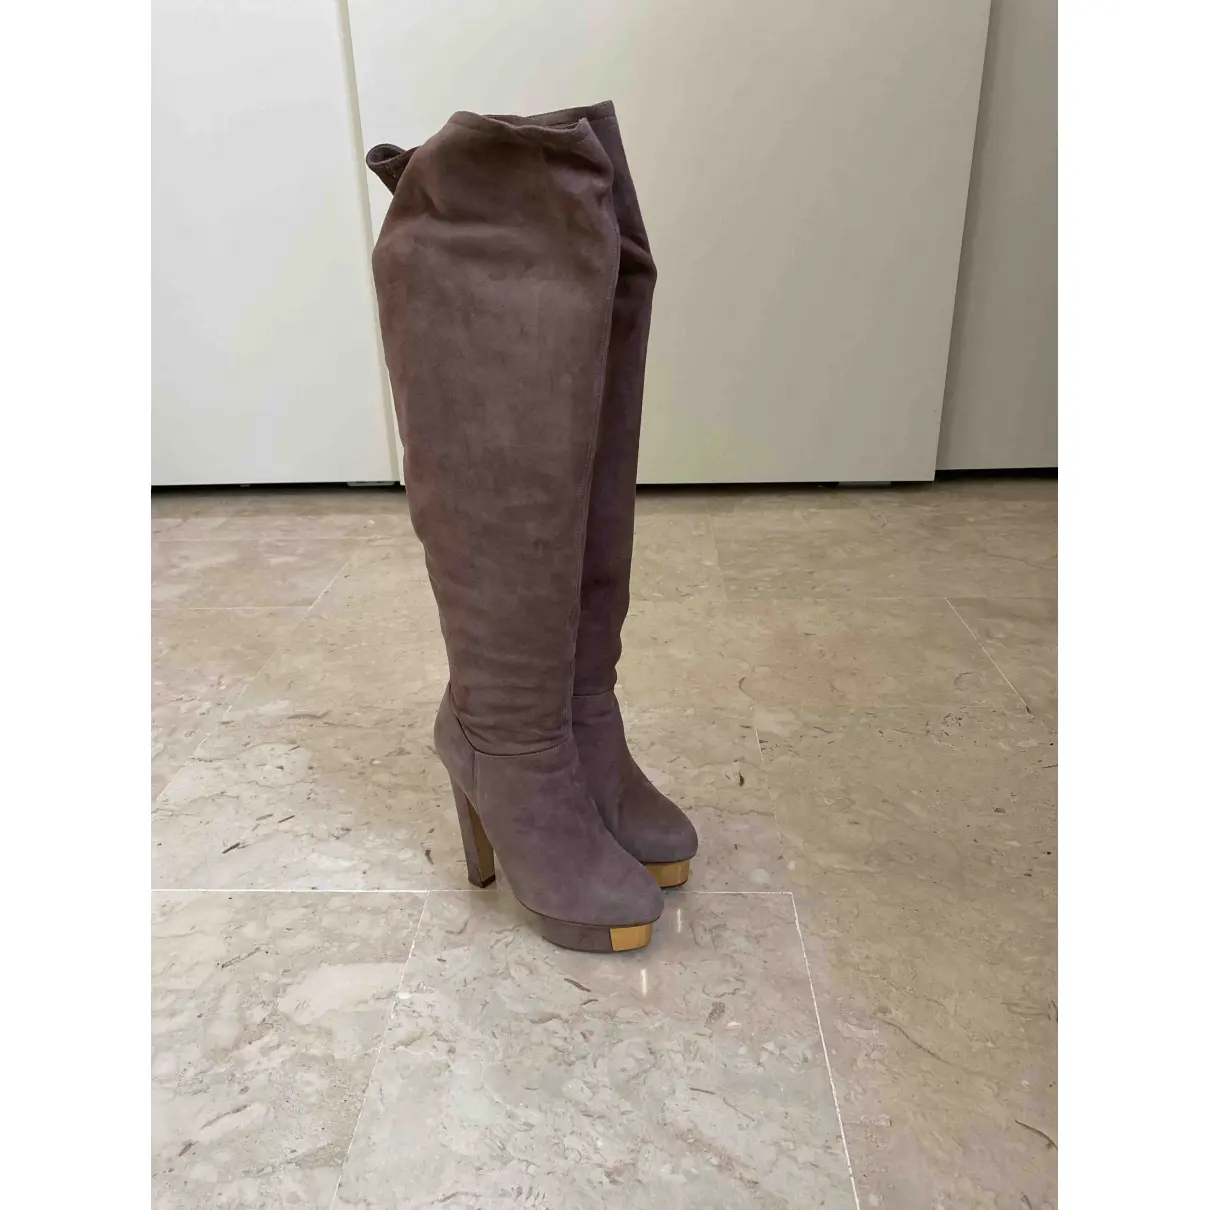 Buy Le Silla Boots online